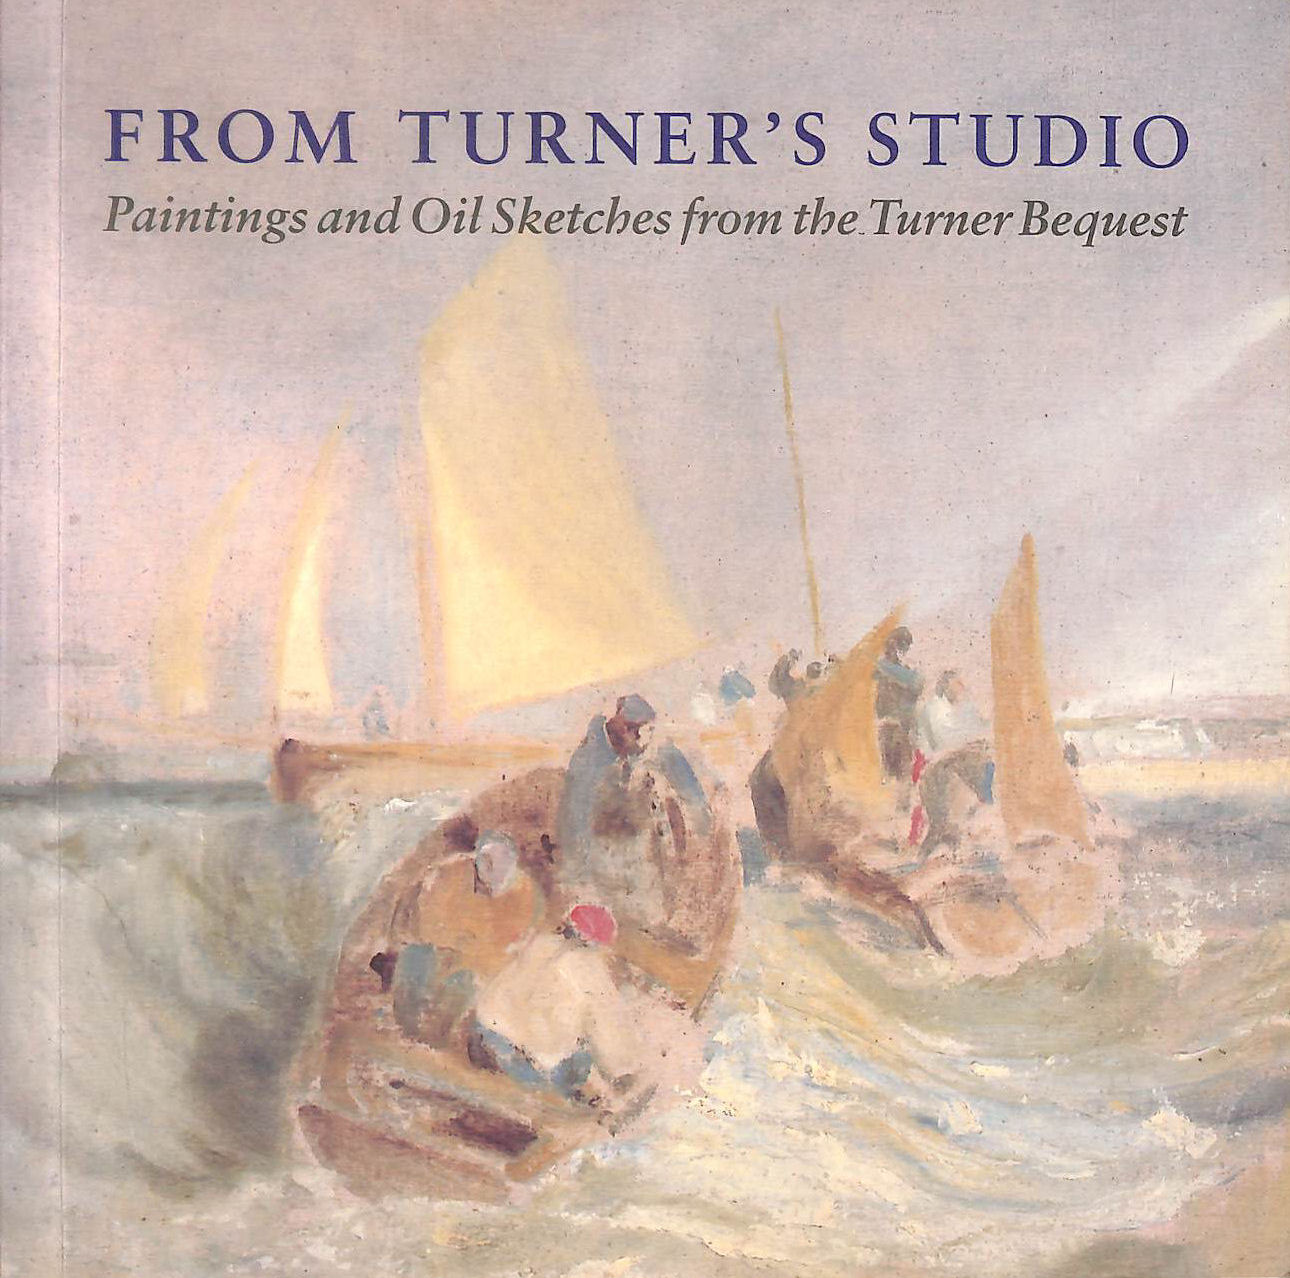 BROWN, DAVID BLAYNEY - From Turner's Studio: Paintings and Oil Sketches from the Turner Bequest